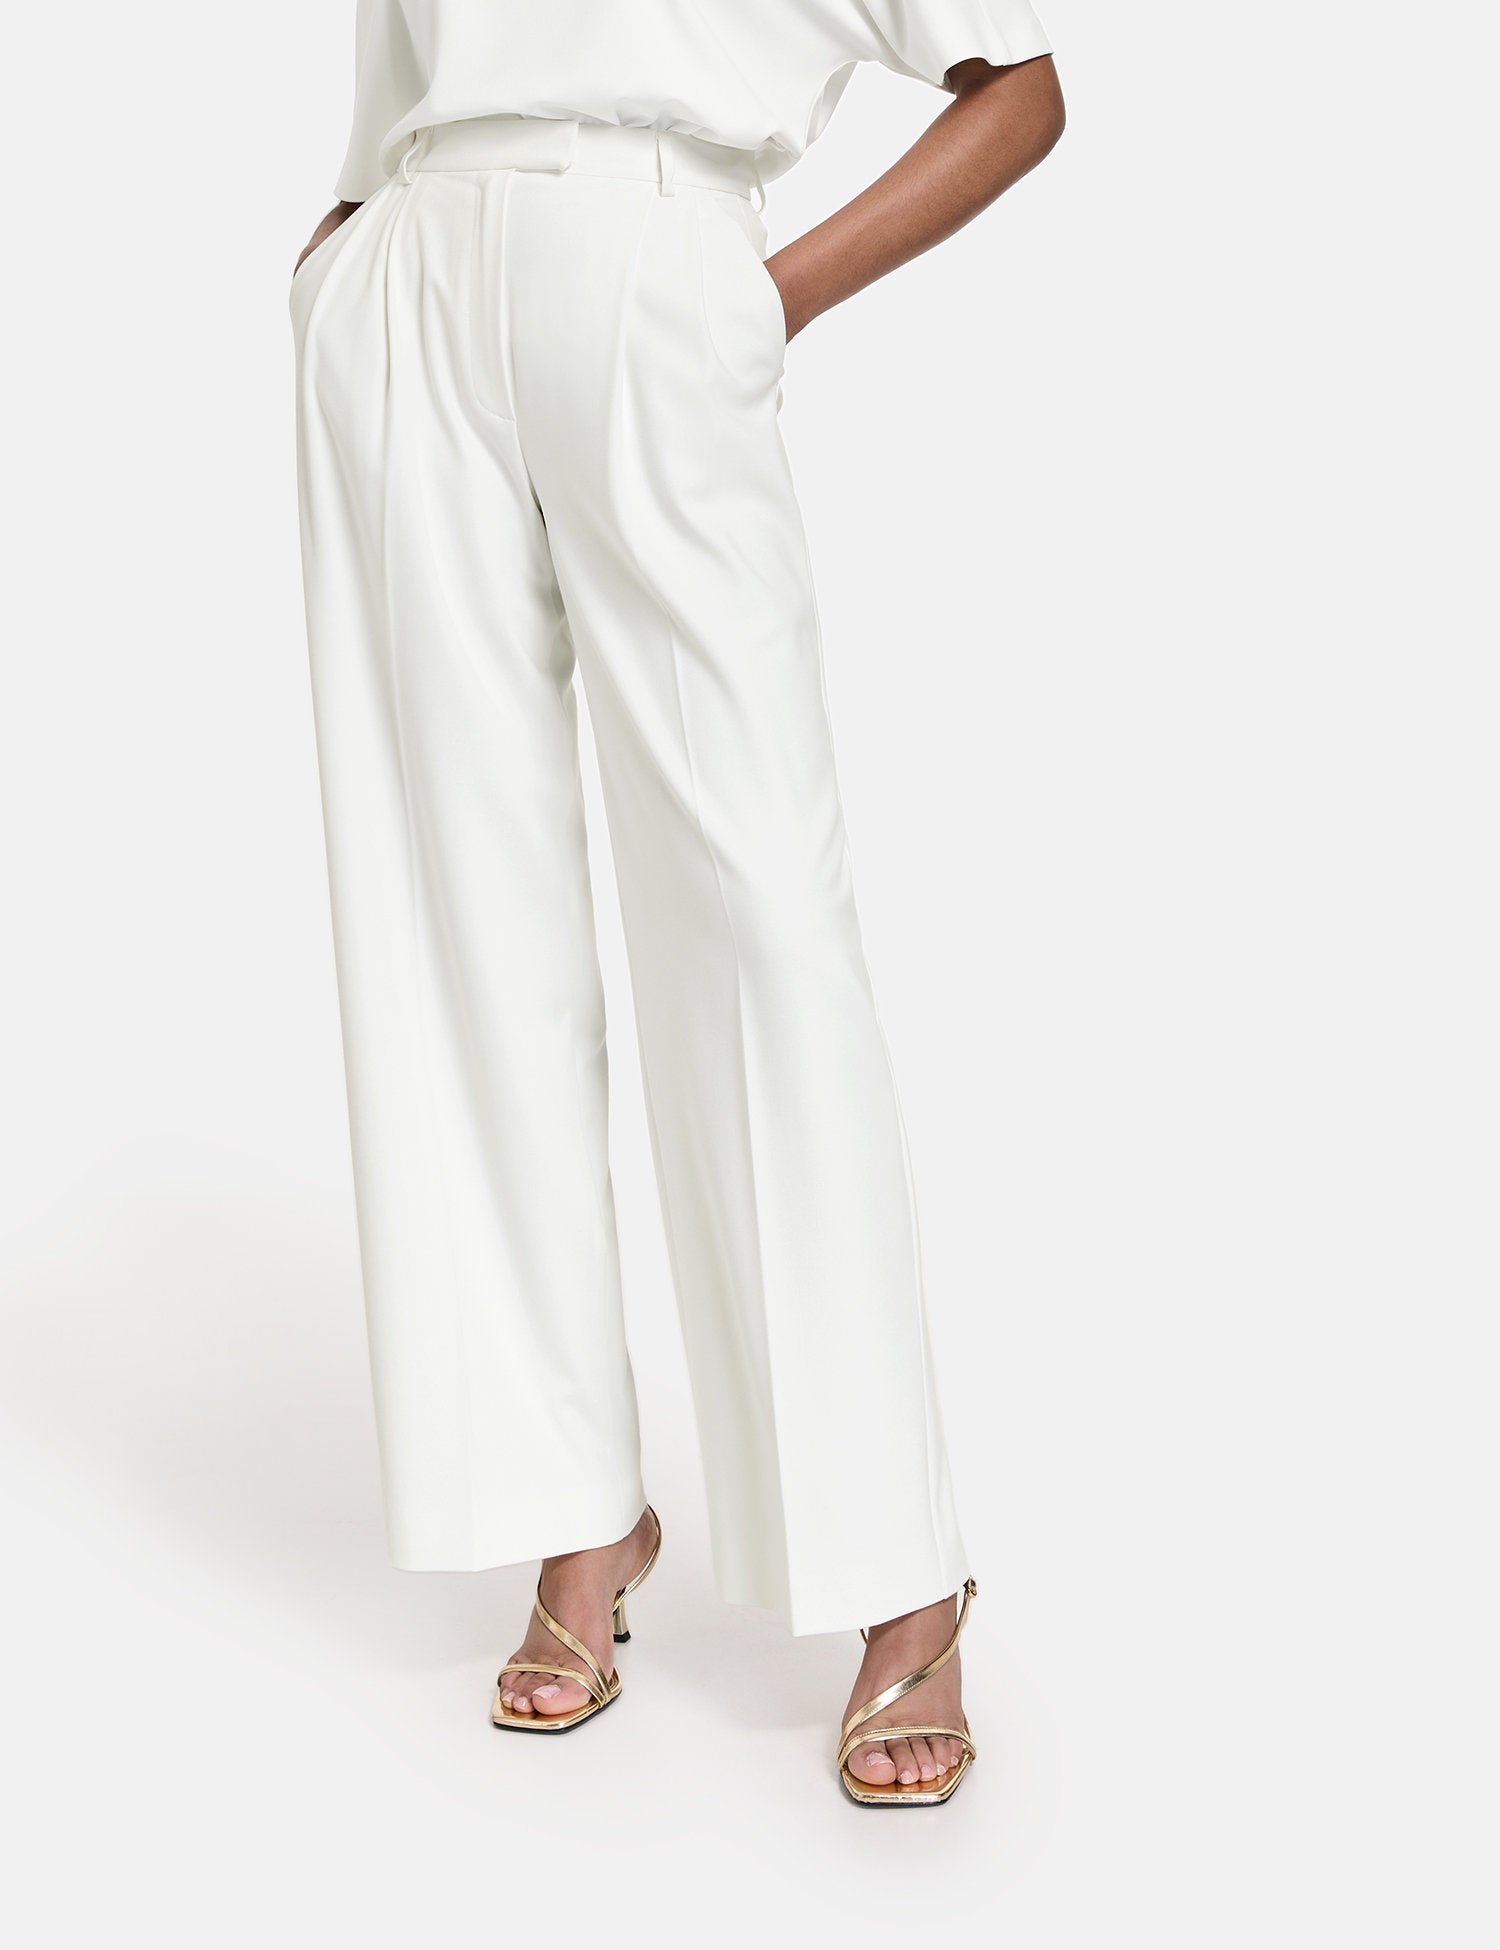 Flowing Trousers With A Wide Leg_520351-11089_9700_04